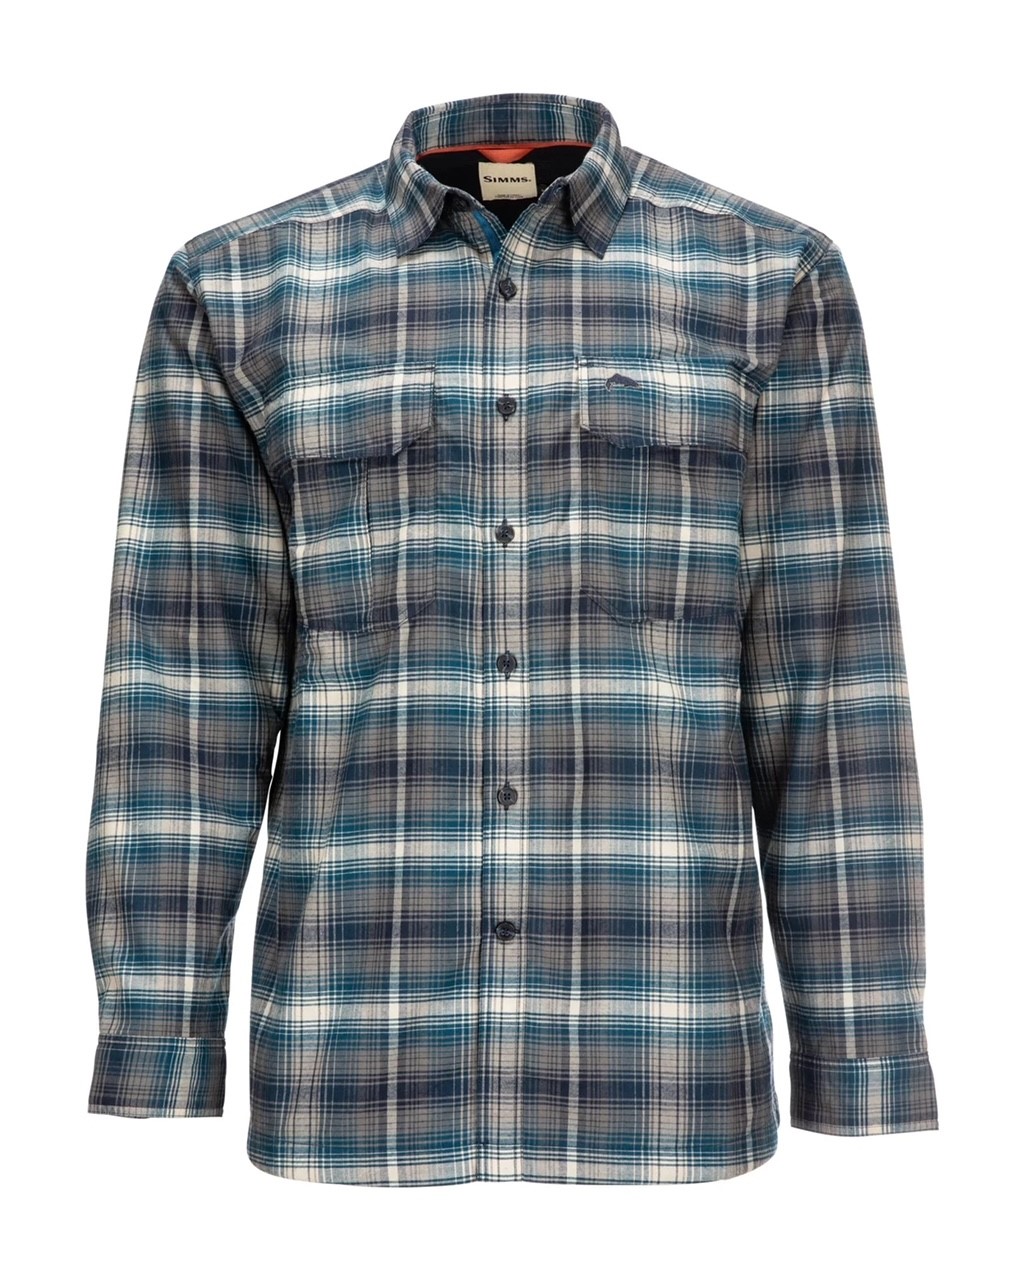 Simms M's Coldweather L/S Shirt - Red Buffalo Plaid - Small